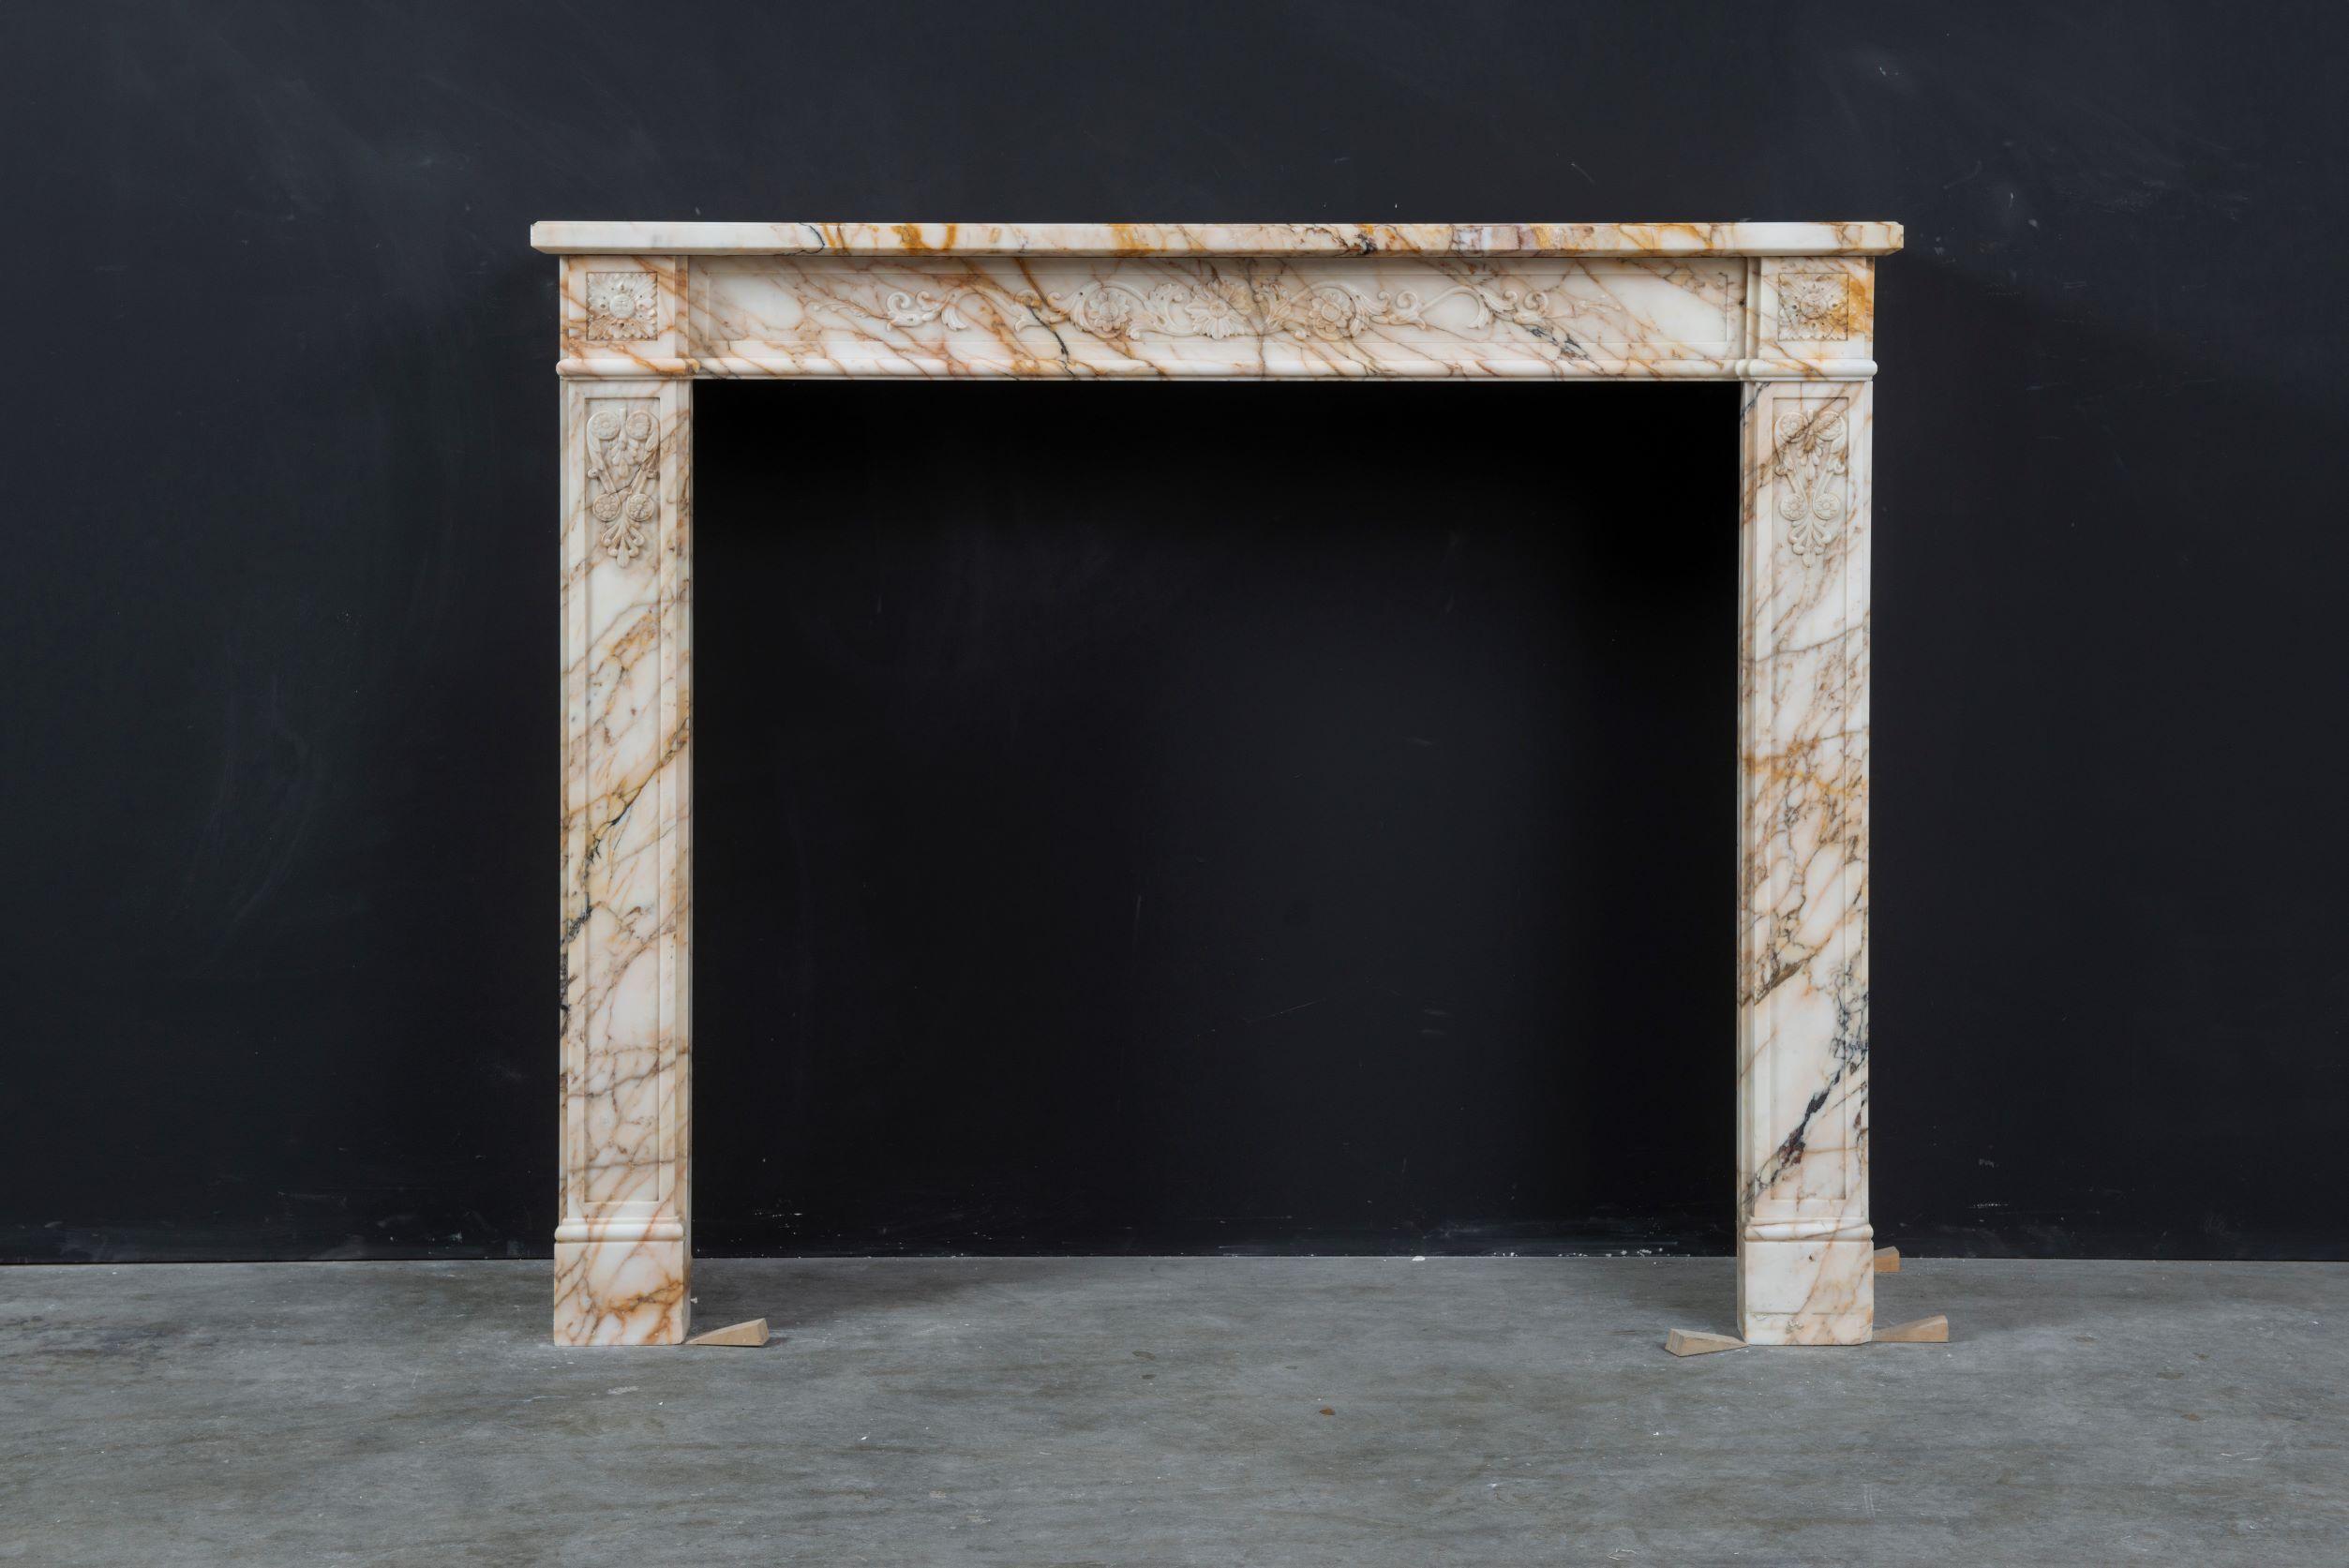 Pleased to offer this enjoyable antique Louis XVI fireplace mantel.

Lovely decorative French Louis XV fireplace mantel in decorative soft toned colorful marble.
The pleasantly colored and veined marble, subtle floral and paneled decorations make